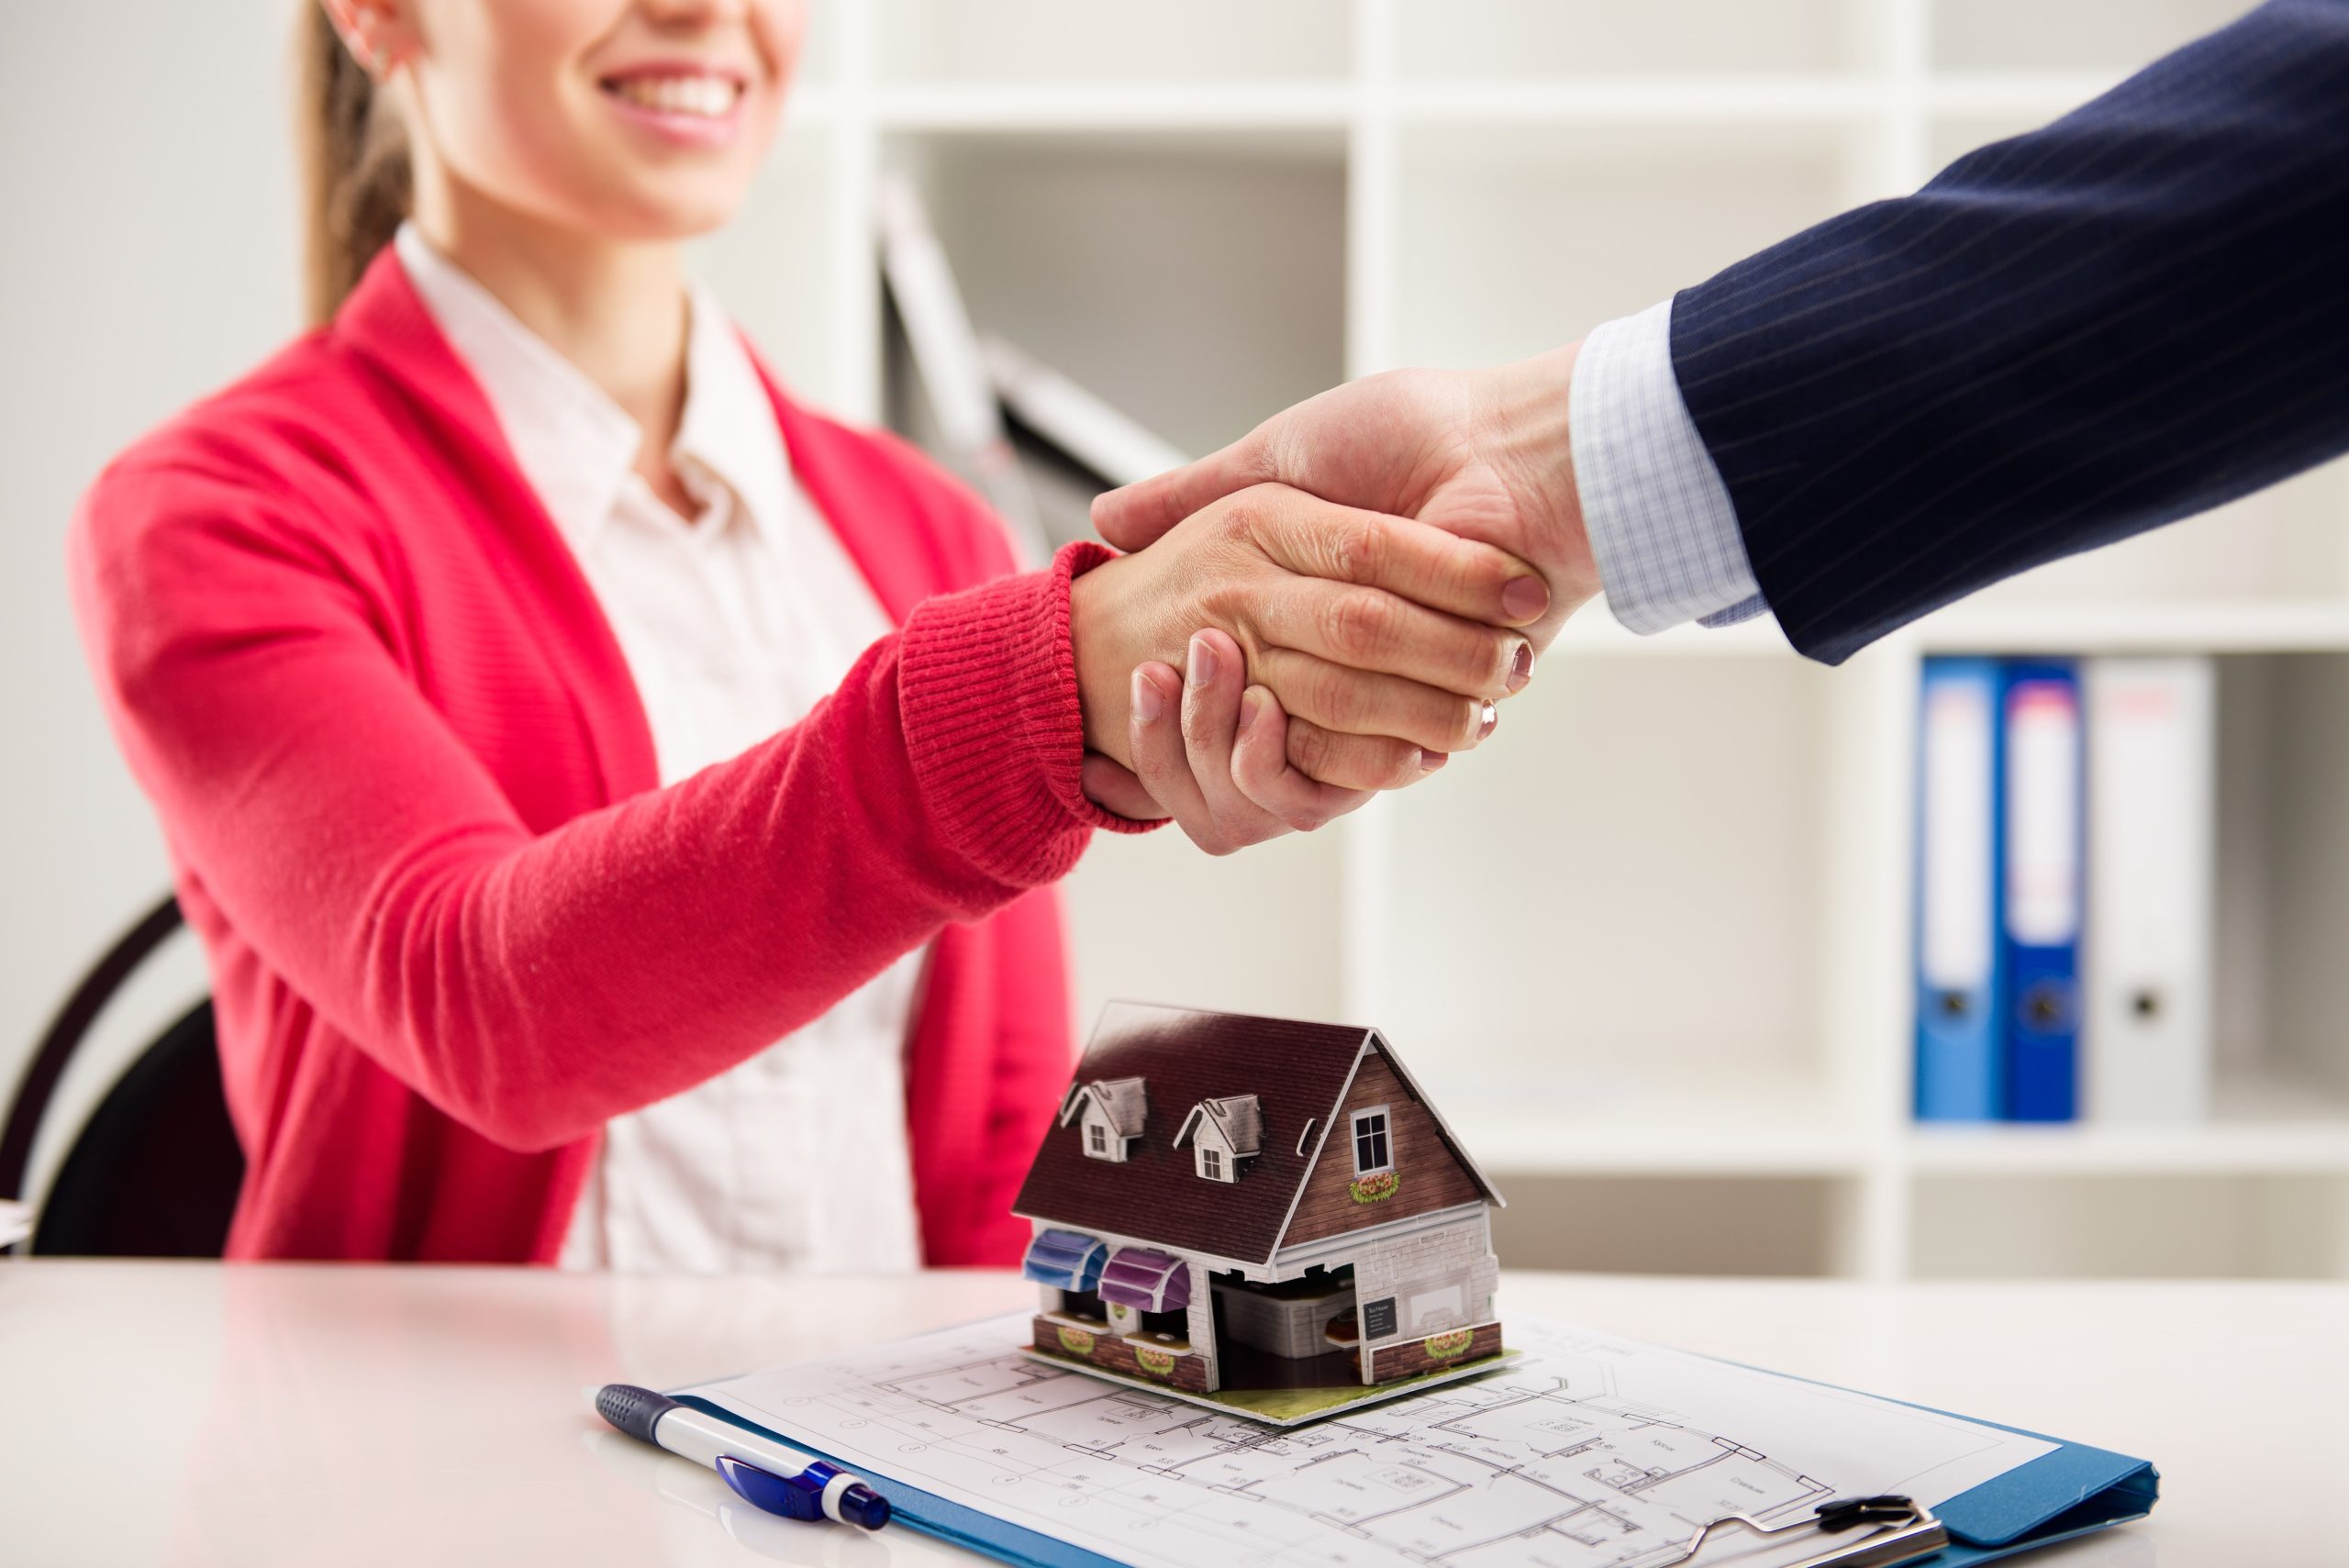 Two business people shaking hands as successful agreement in real estate agency office